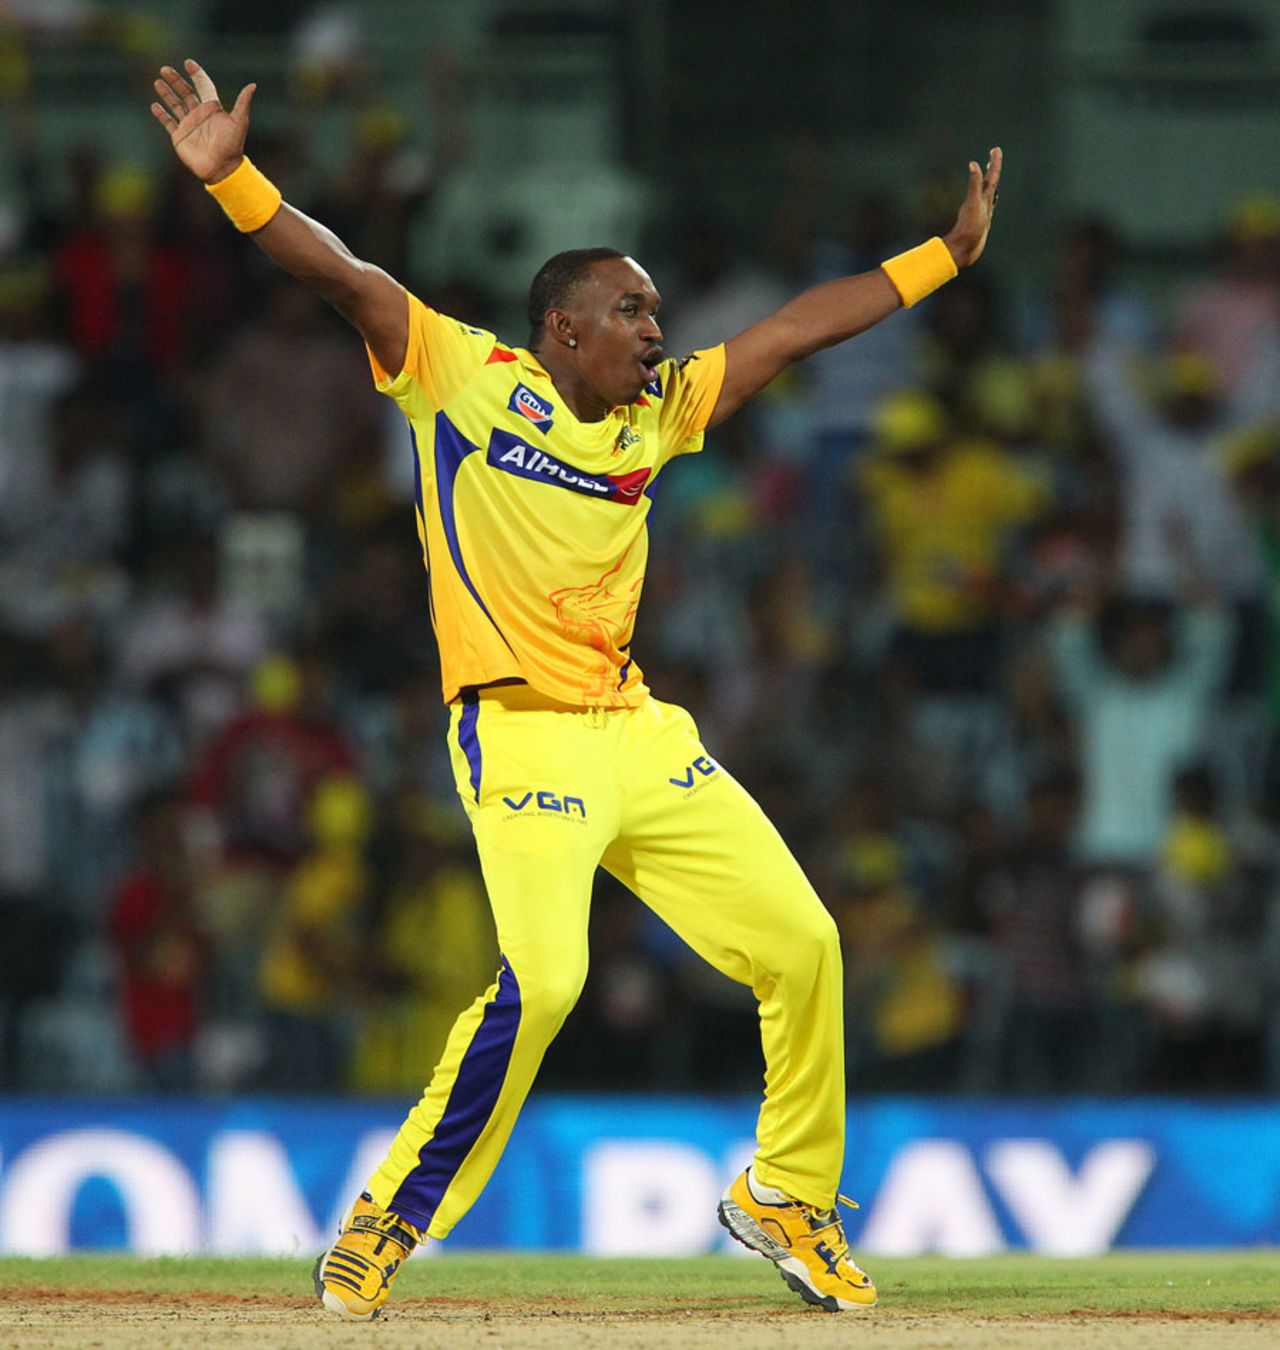 Dwayne Bravo celebrates after taking a wicket in the final over, Chennai Super Kings v Kings XI Punjab, IPL 2013, Chennai, May 2, 2013